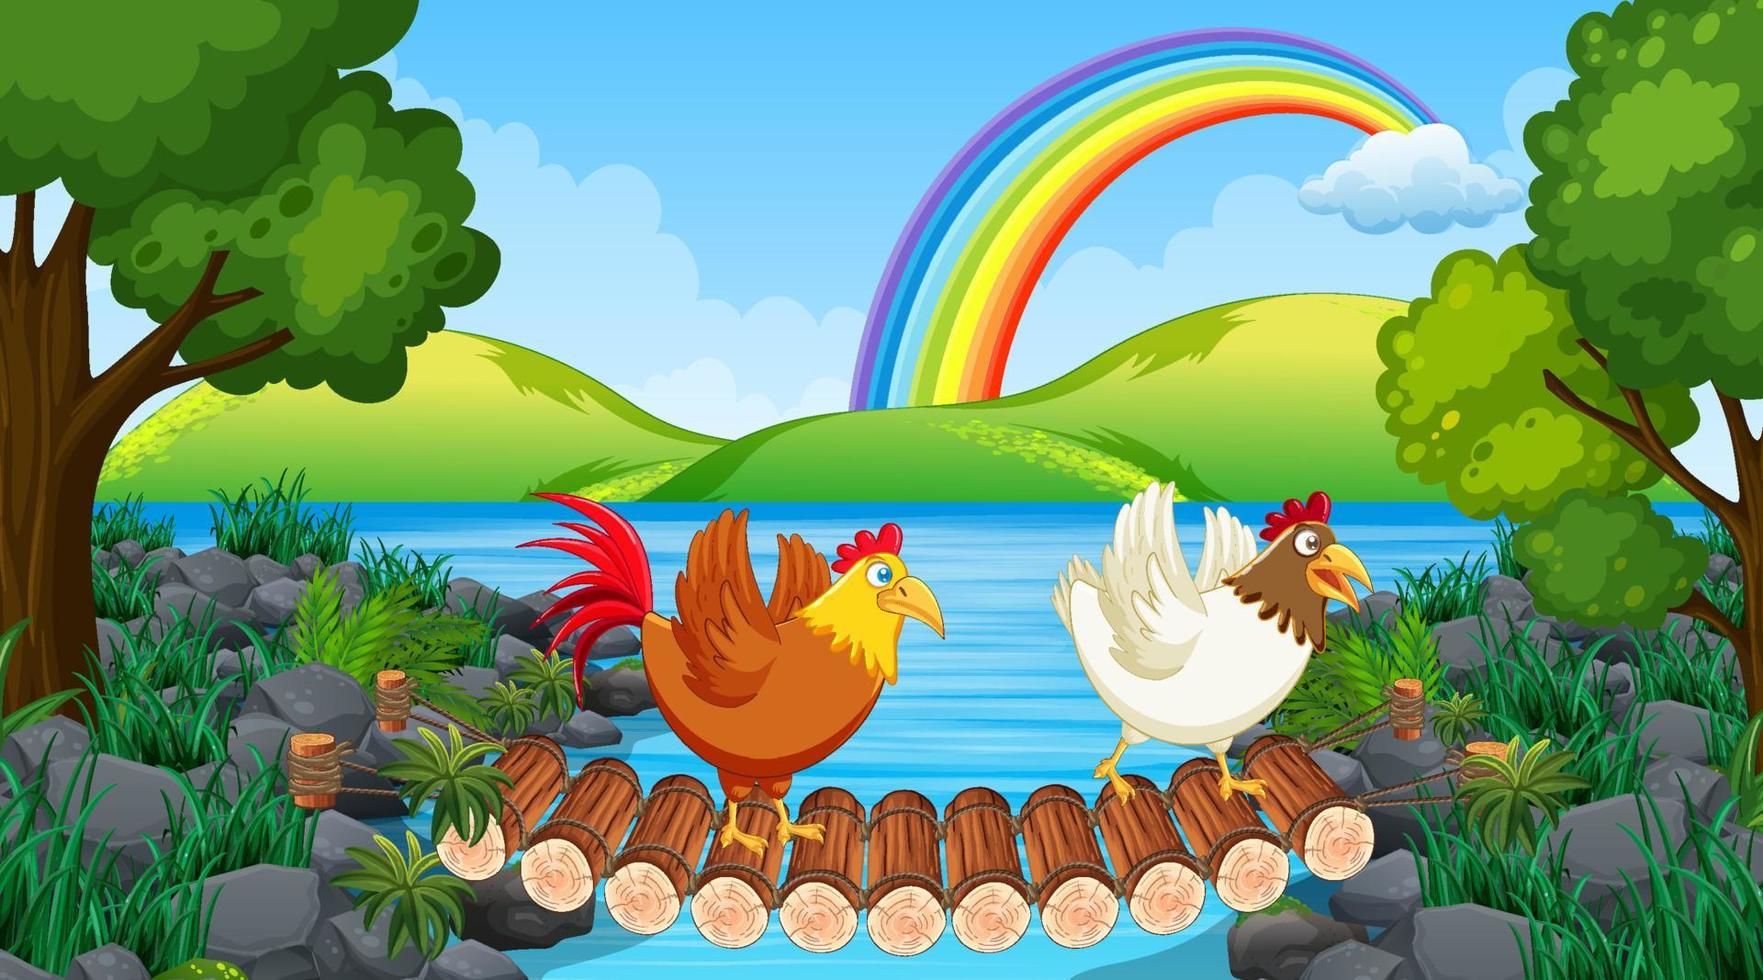 Park scene with two chickens on the bridge vector